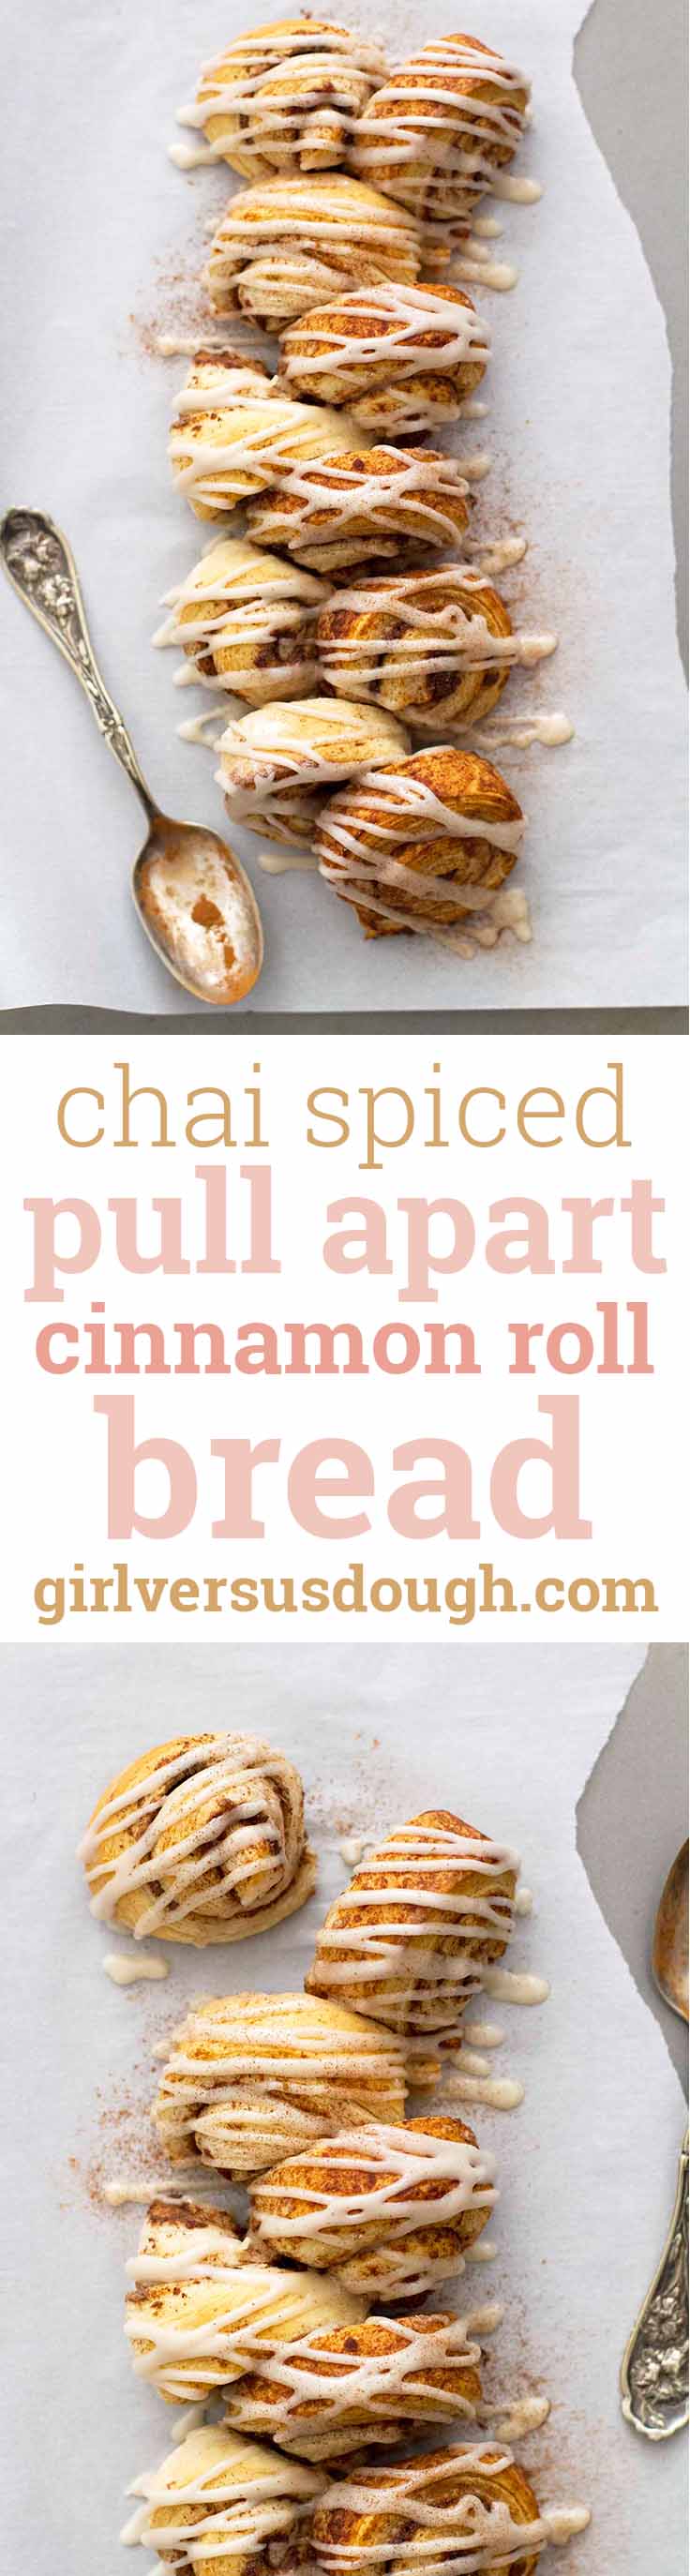 Chai Spiced Cinnamon Roll Pull Apart Bread -- cinnamon rolls flavored with chai spices and baked into a deliciously sweet pull-apart loaf that's perfect for a breakfast bunch! girlversusdough.com @girlversusdough